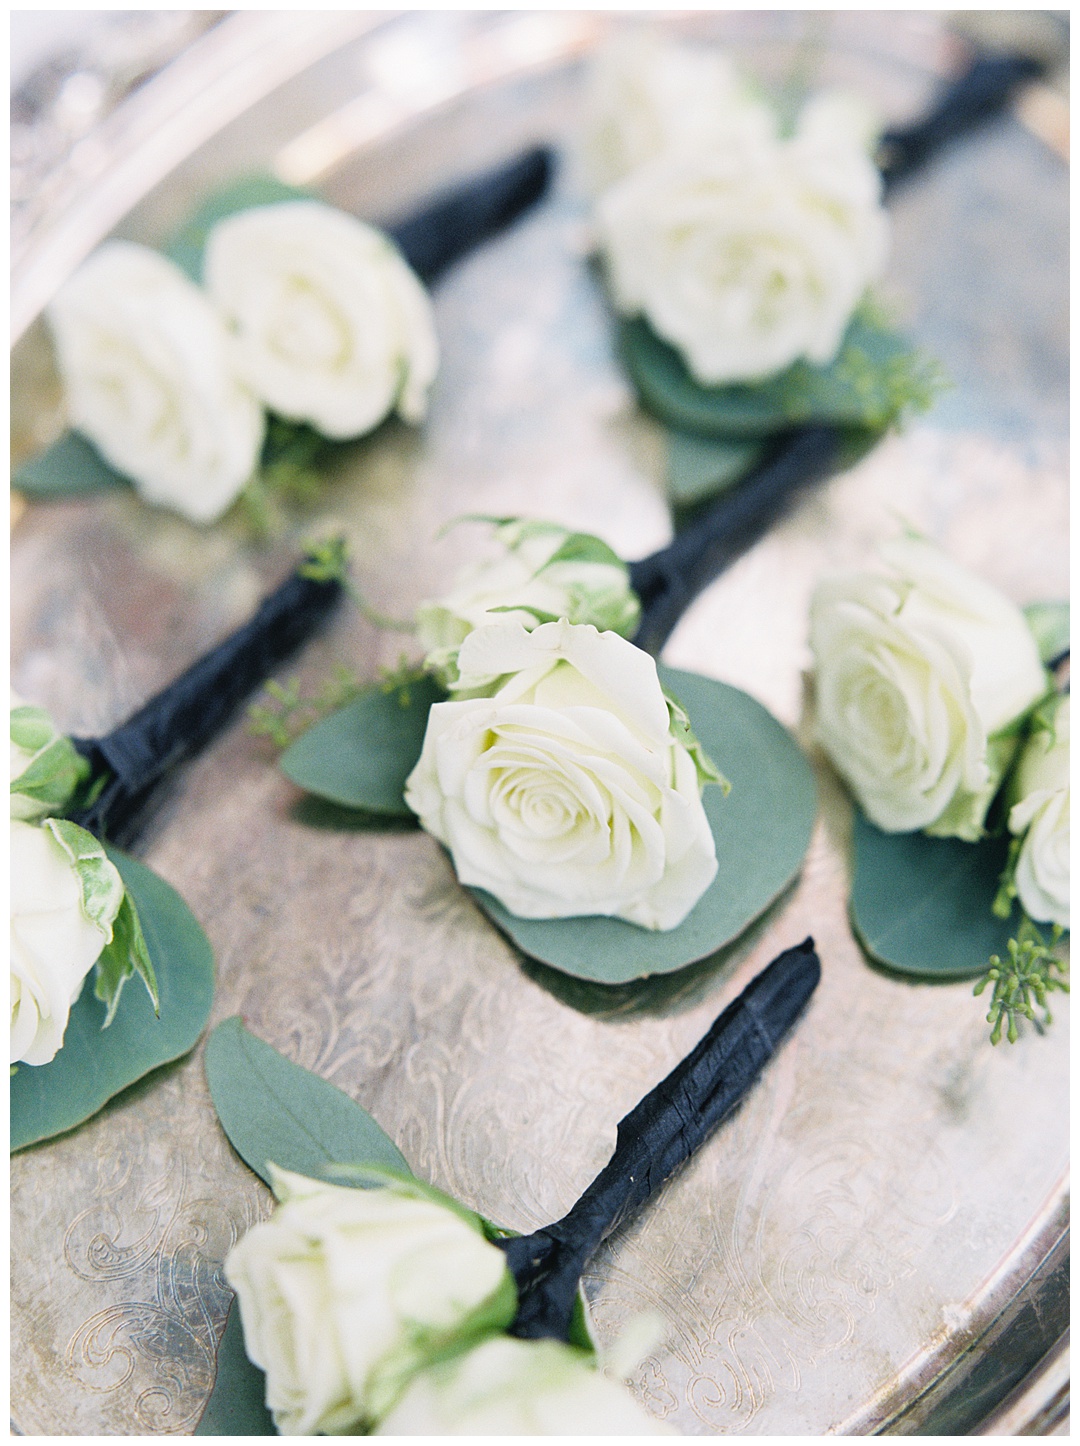 Boutonneires Lush Backyard Wedding on Film Featured on Magnolia Rouge with Sarah Sunstrom Photography